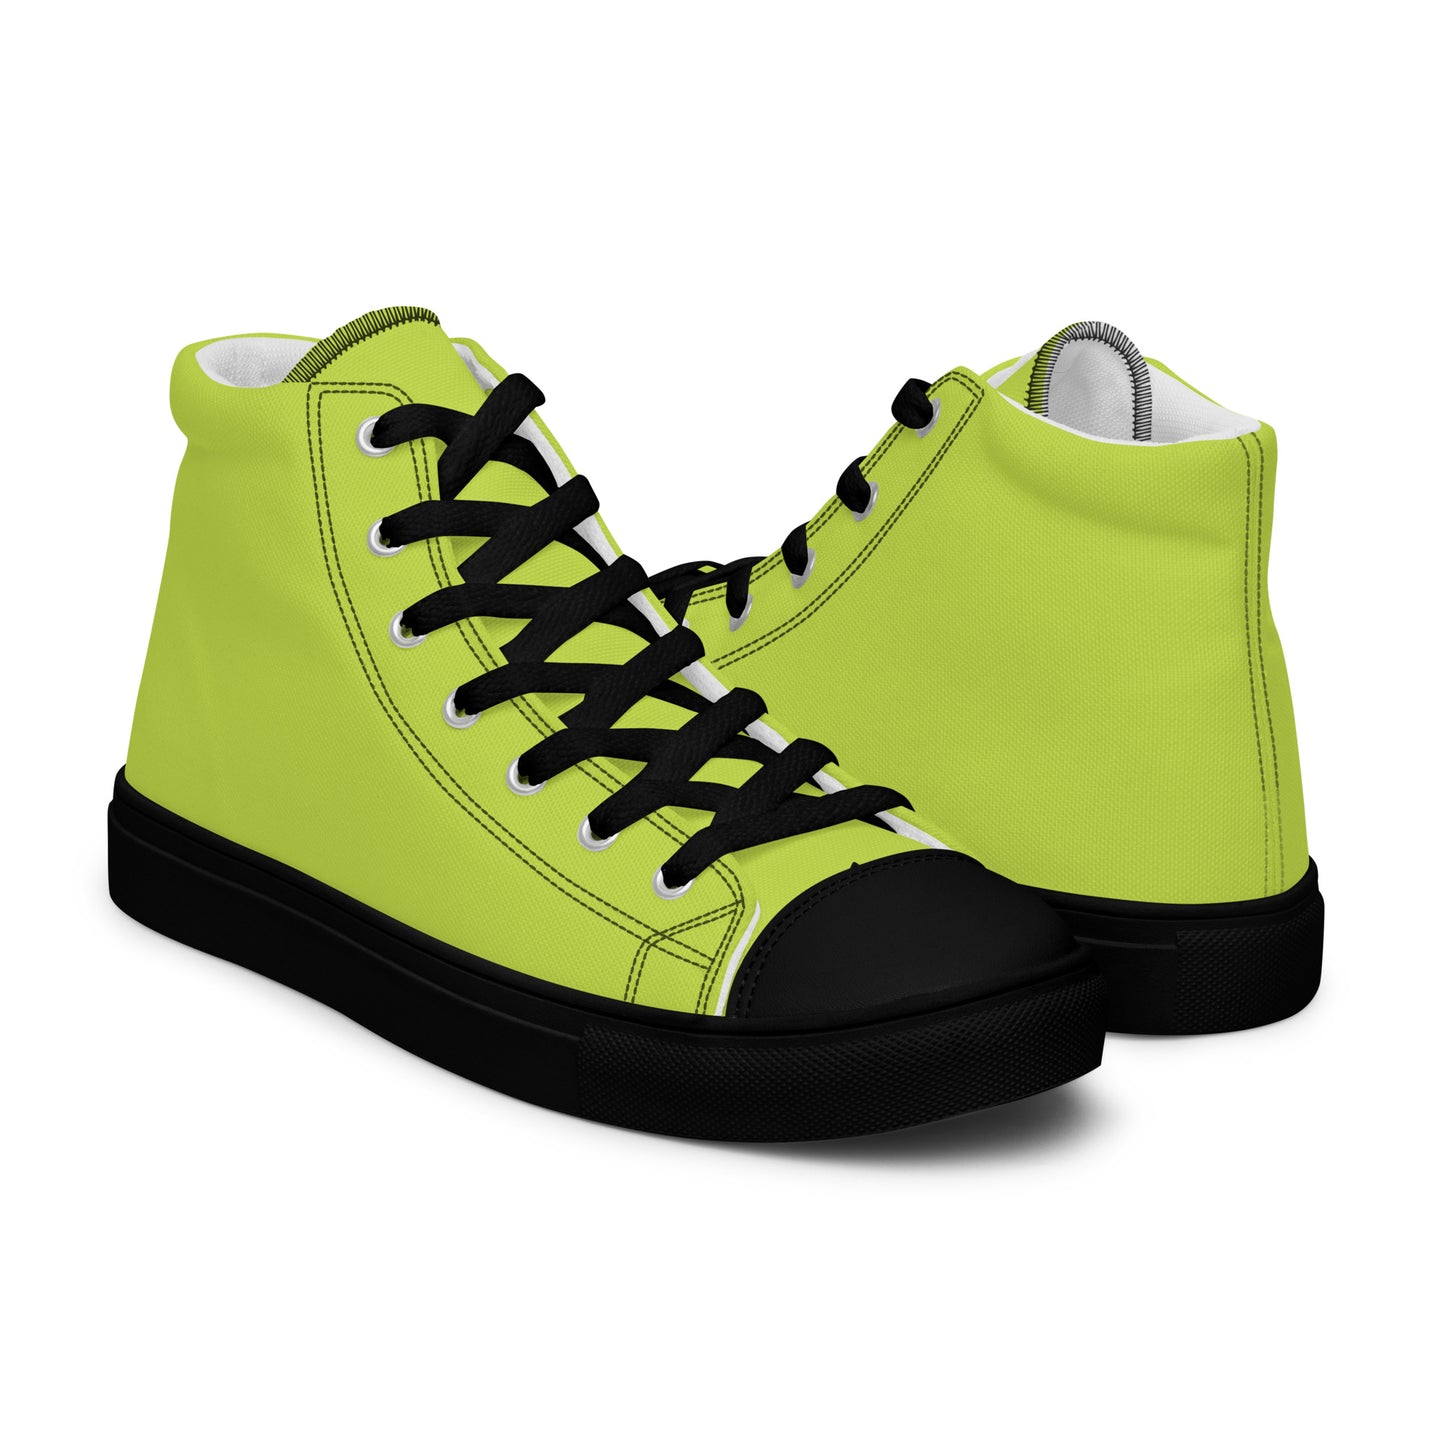 Neon Green - Sustainably Made Men's High Top Canvas Shoes